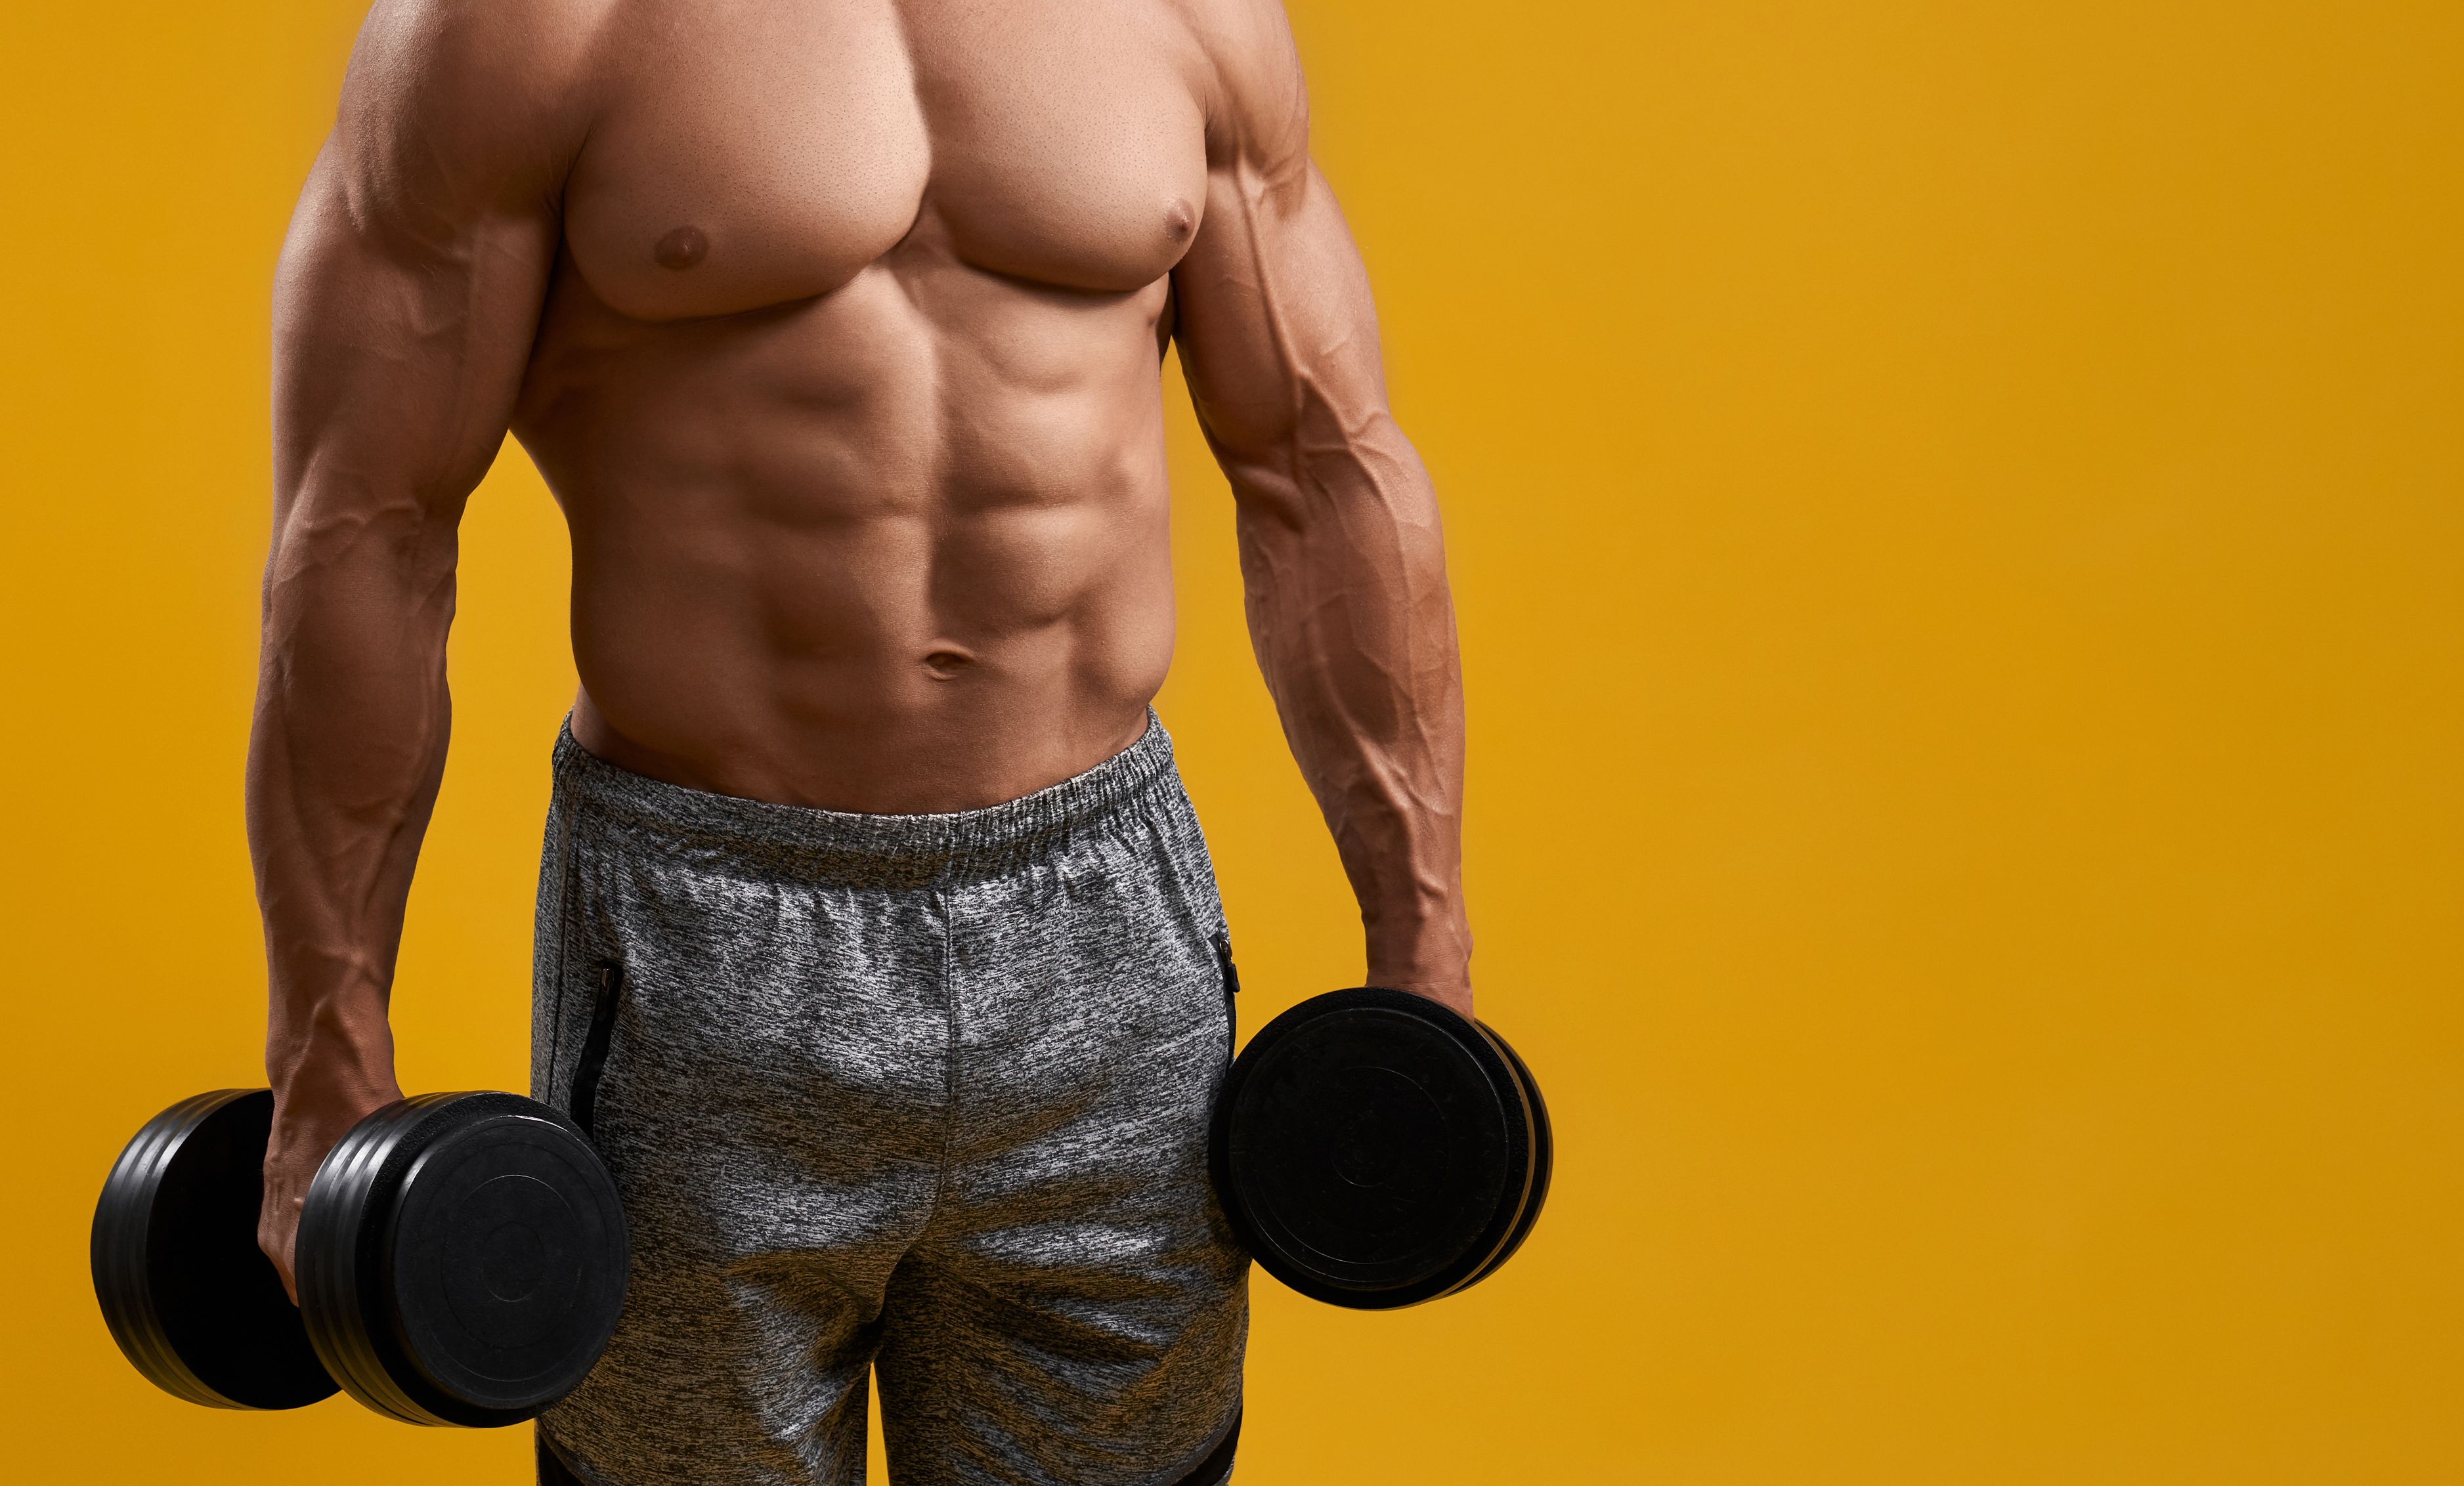 Chest: Best exercises to grow